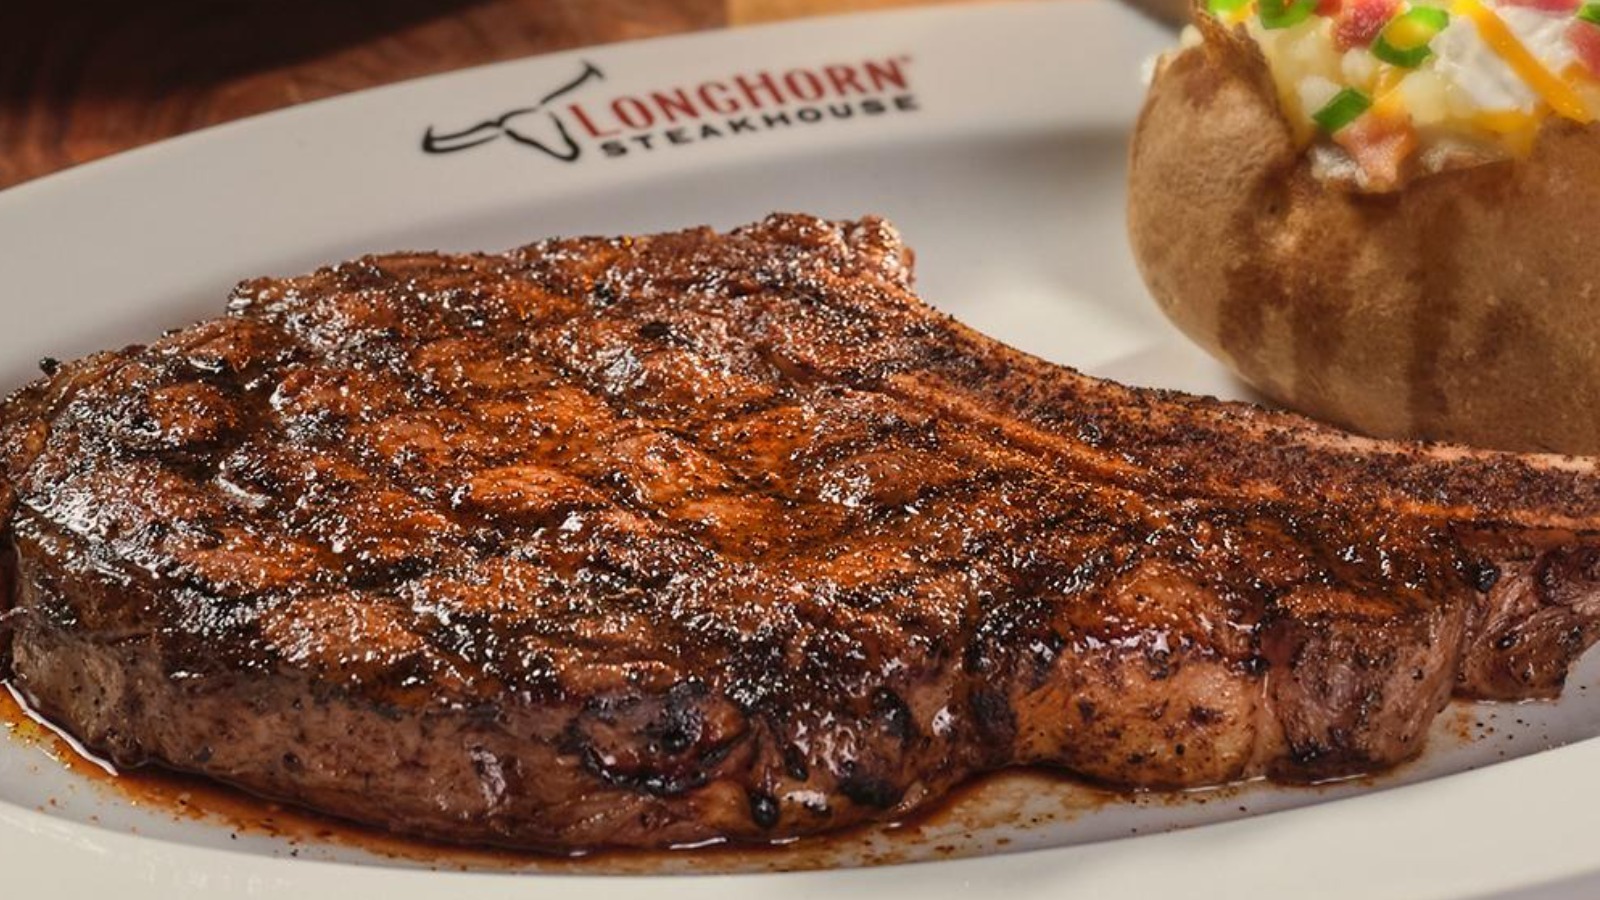 LongHorn Steakhouse - The Steak Knives you love, now available for the steak  lover in your life. Get 'em while we got 'em for only $34.99. Available  in-restaurant at select locations.